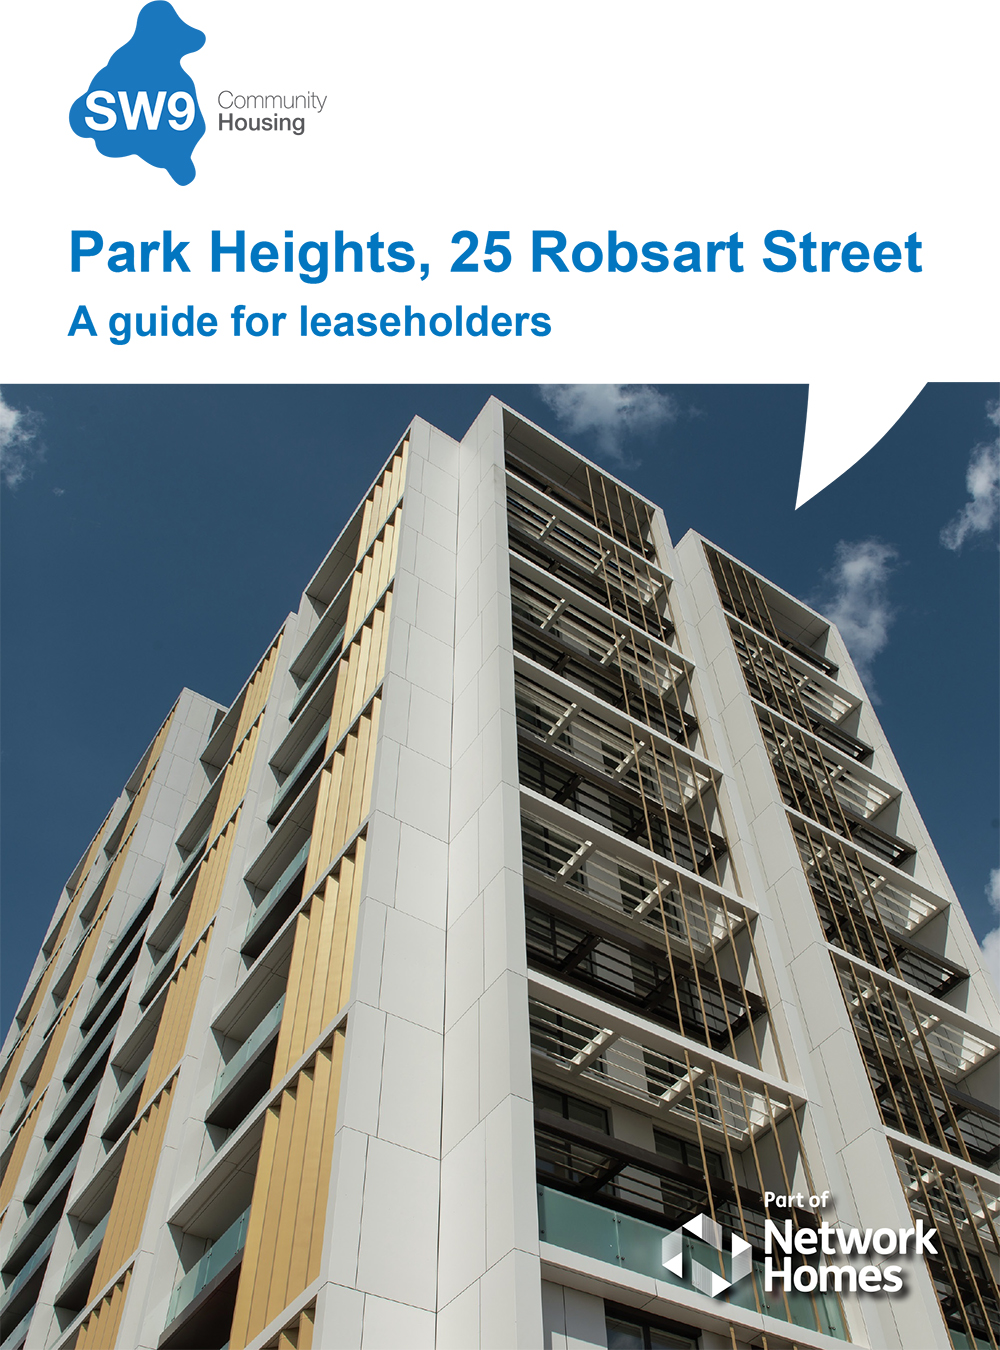 SW9 Park Heights Guide for Leaseholders front cover